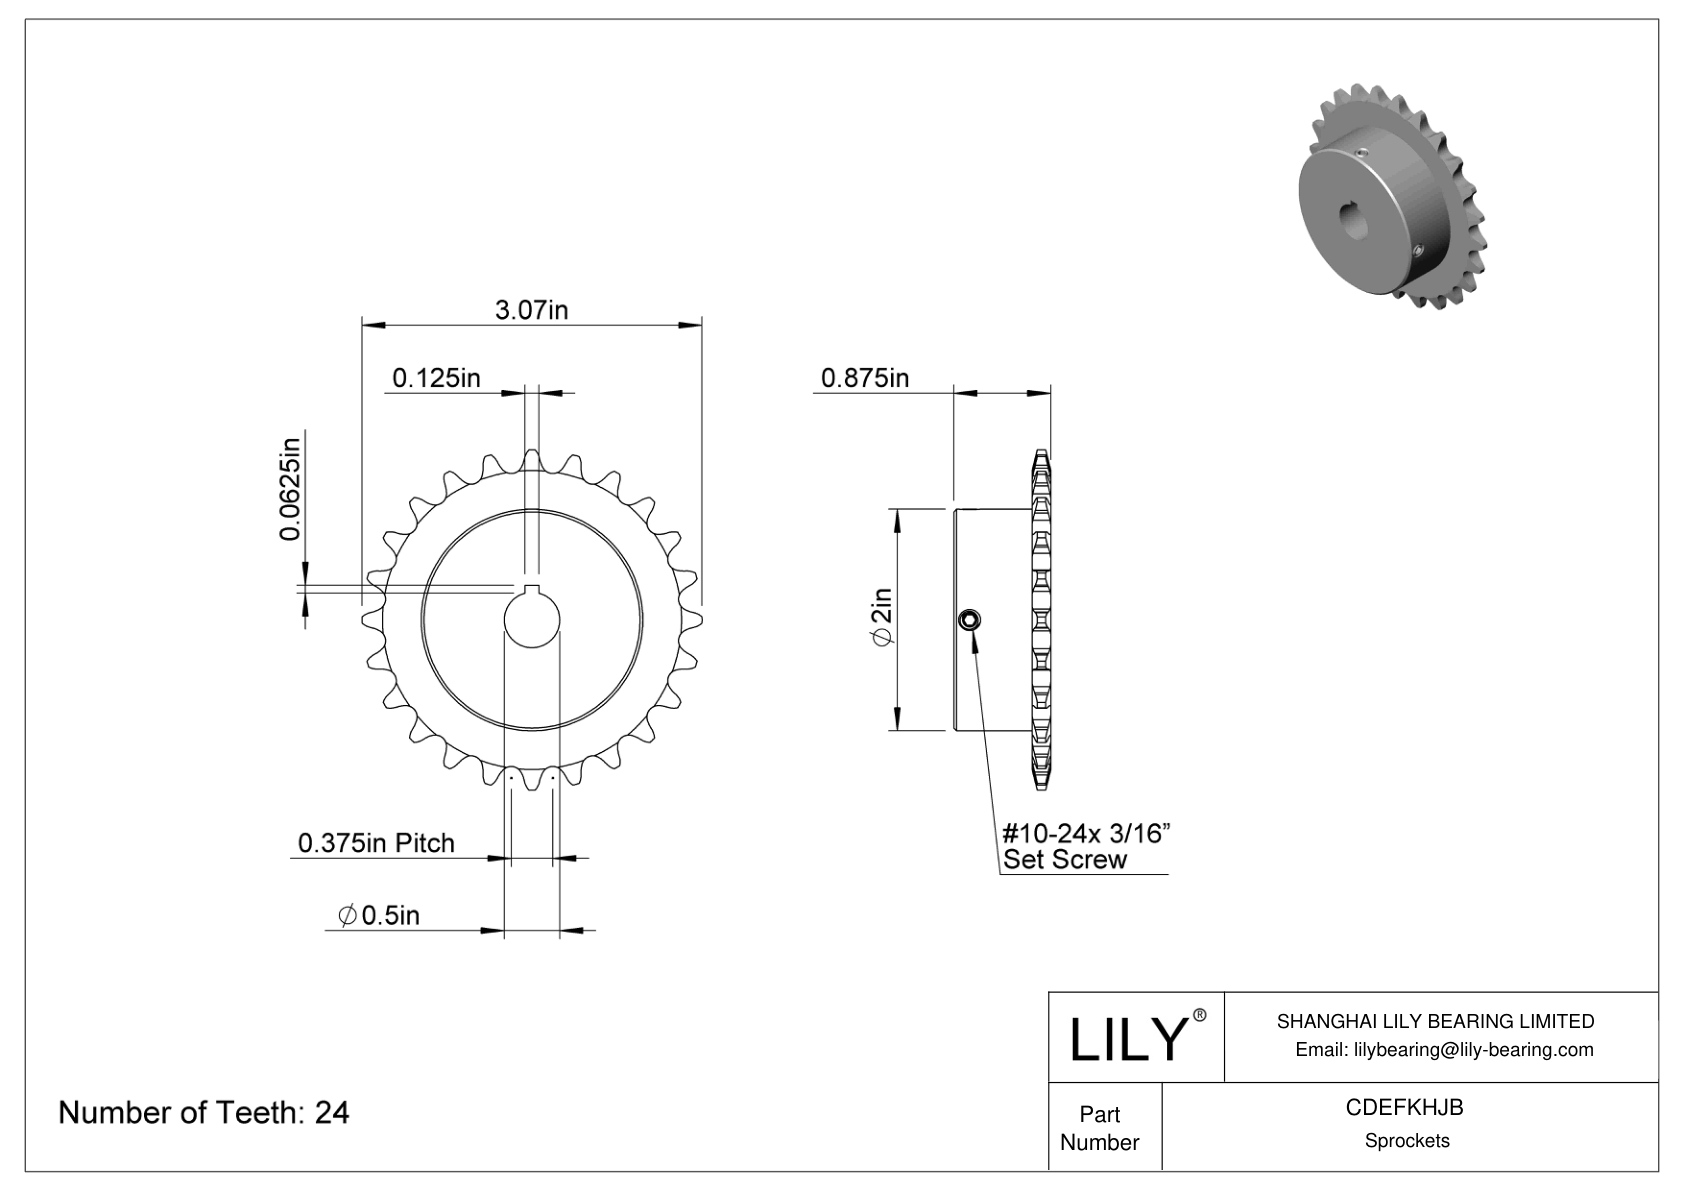 CDEFKHJB Corrosion-Resistant Sprockets for ANSI Roller Chain cad drawing